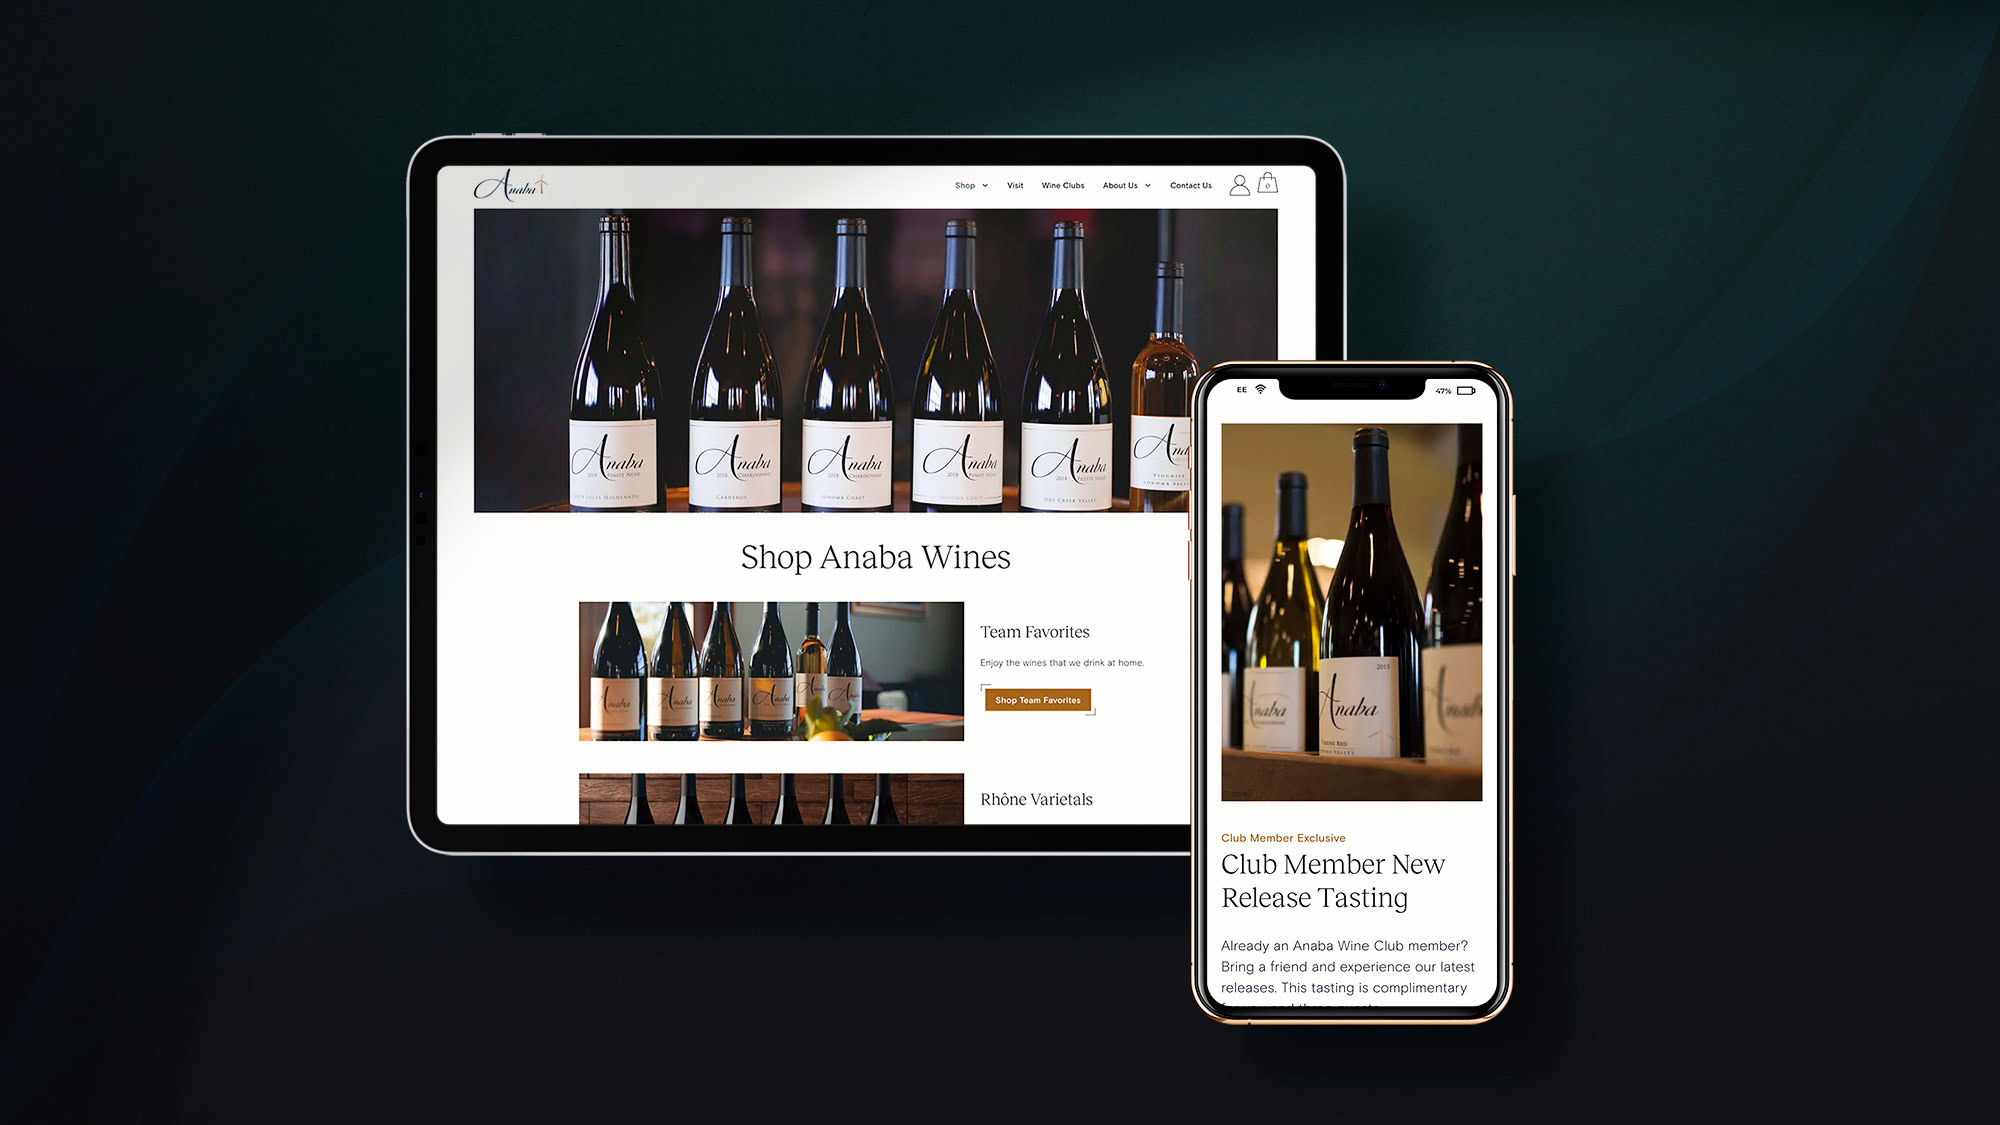 Phone and tablet views of Anaba Wines website pages.